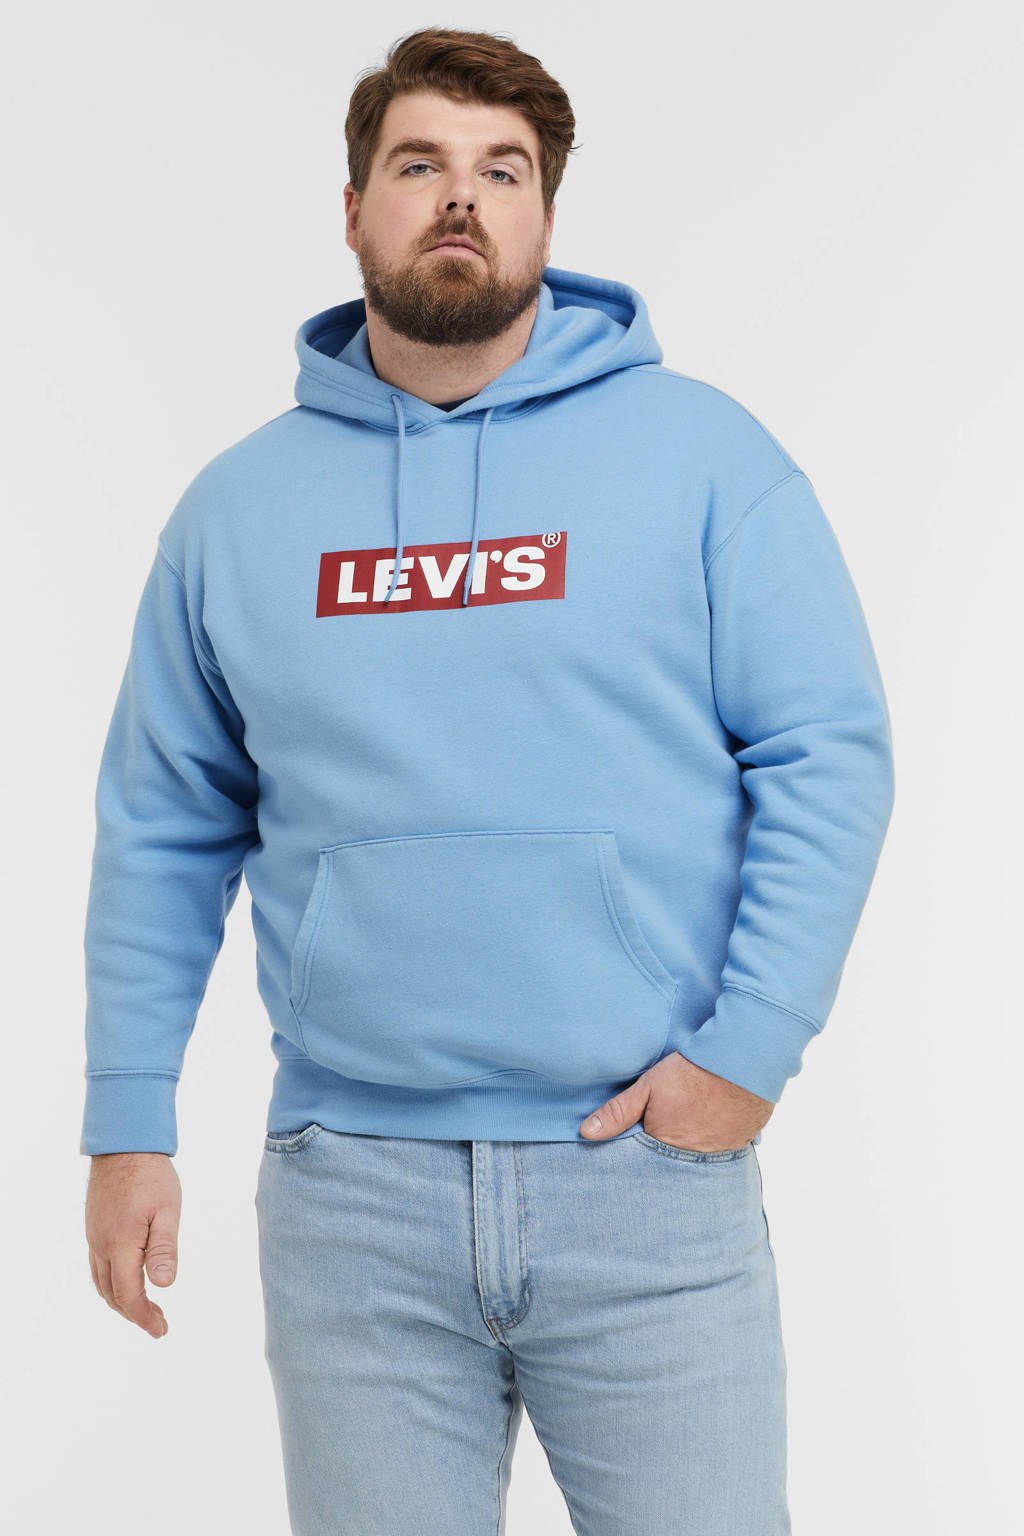 Levi's Big and Tall hoodie Plus Size met logo della robia